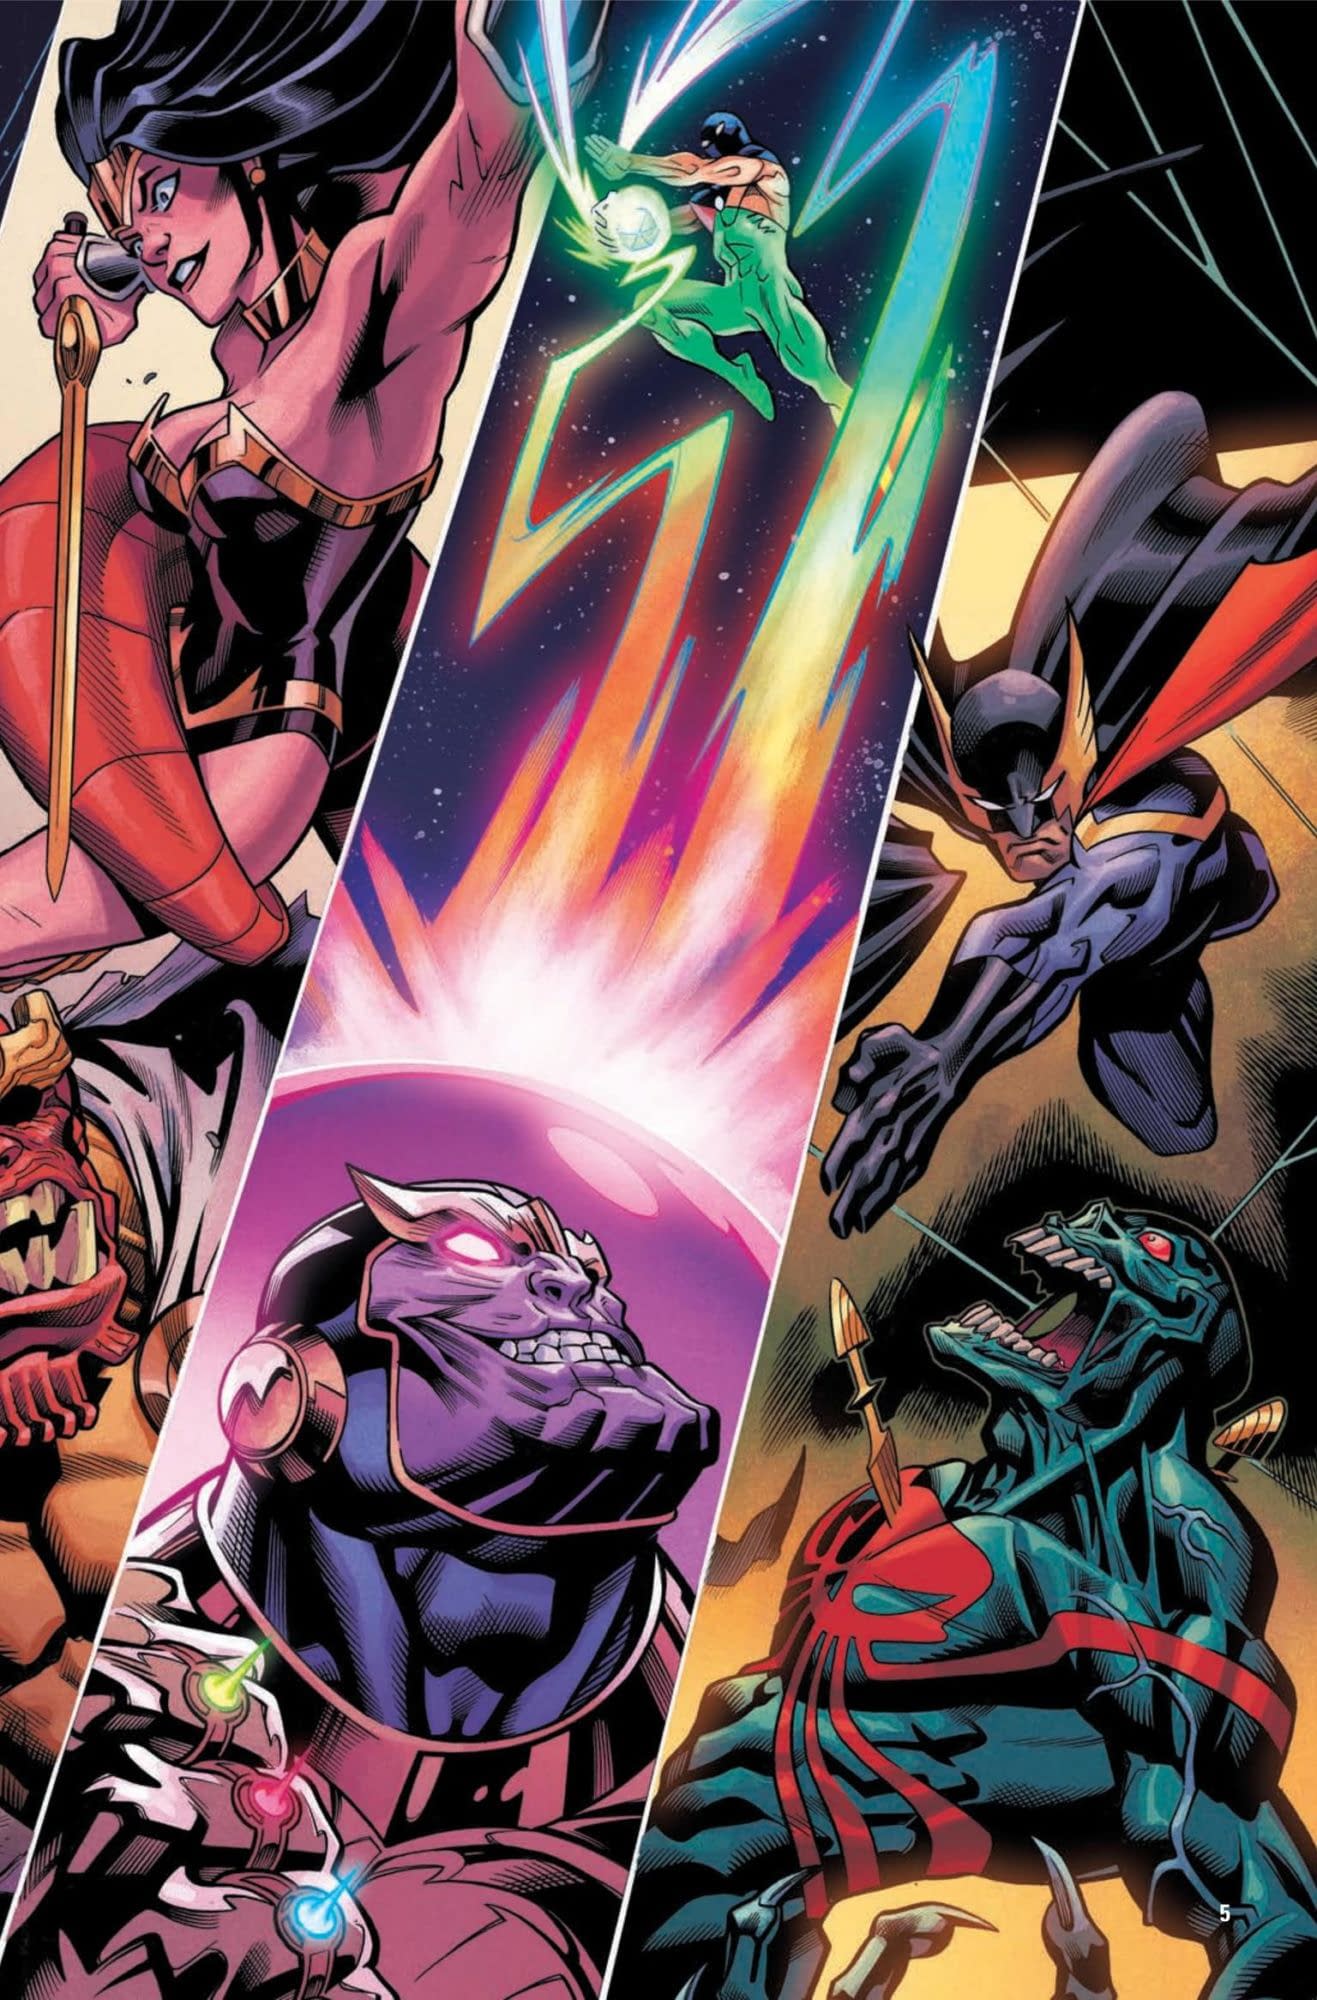 Marvel's Justice League Take On Avengers